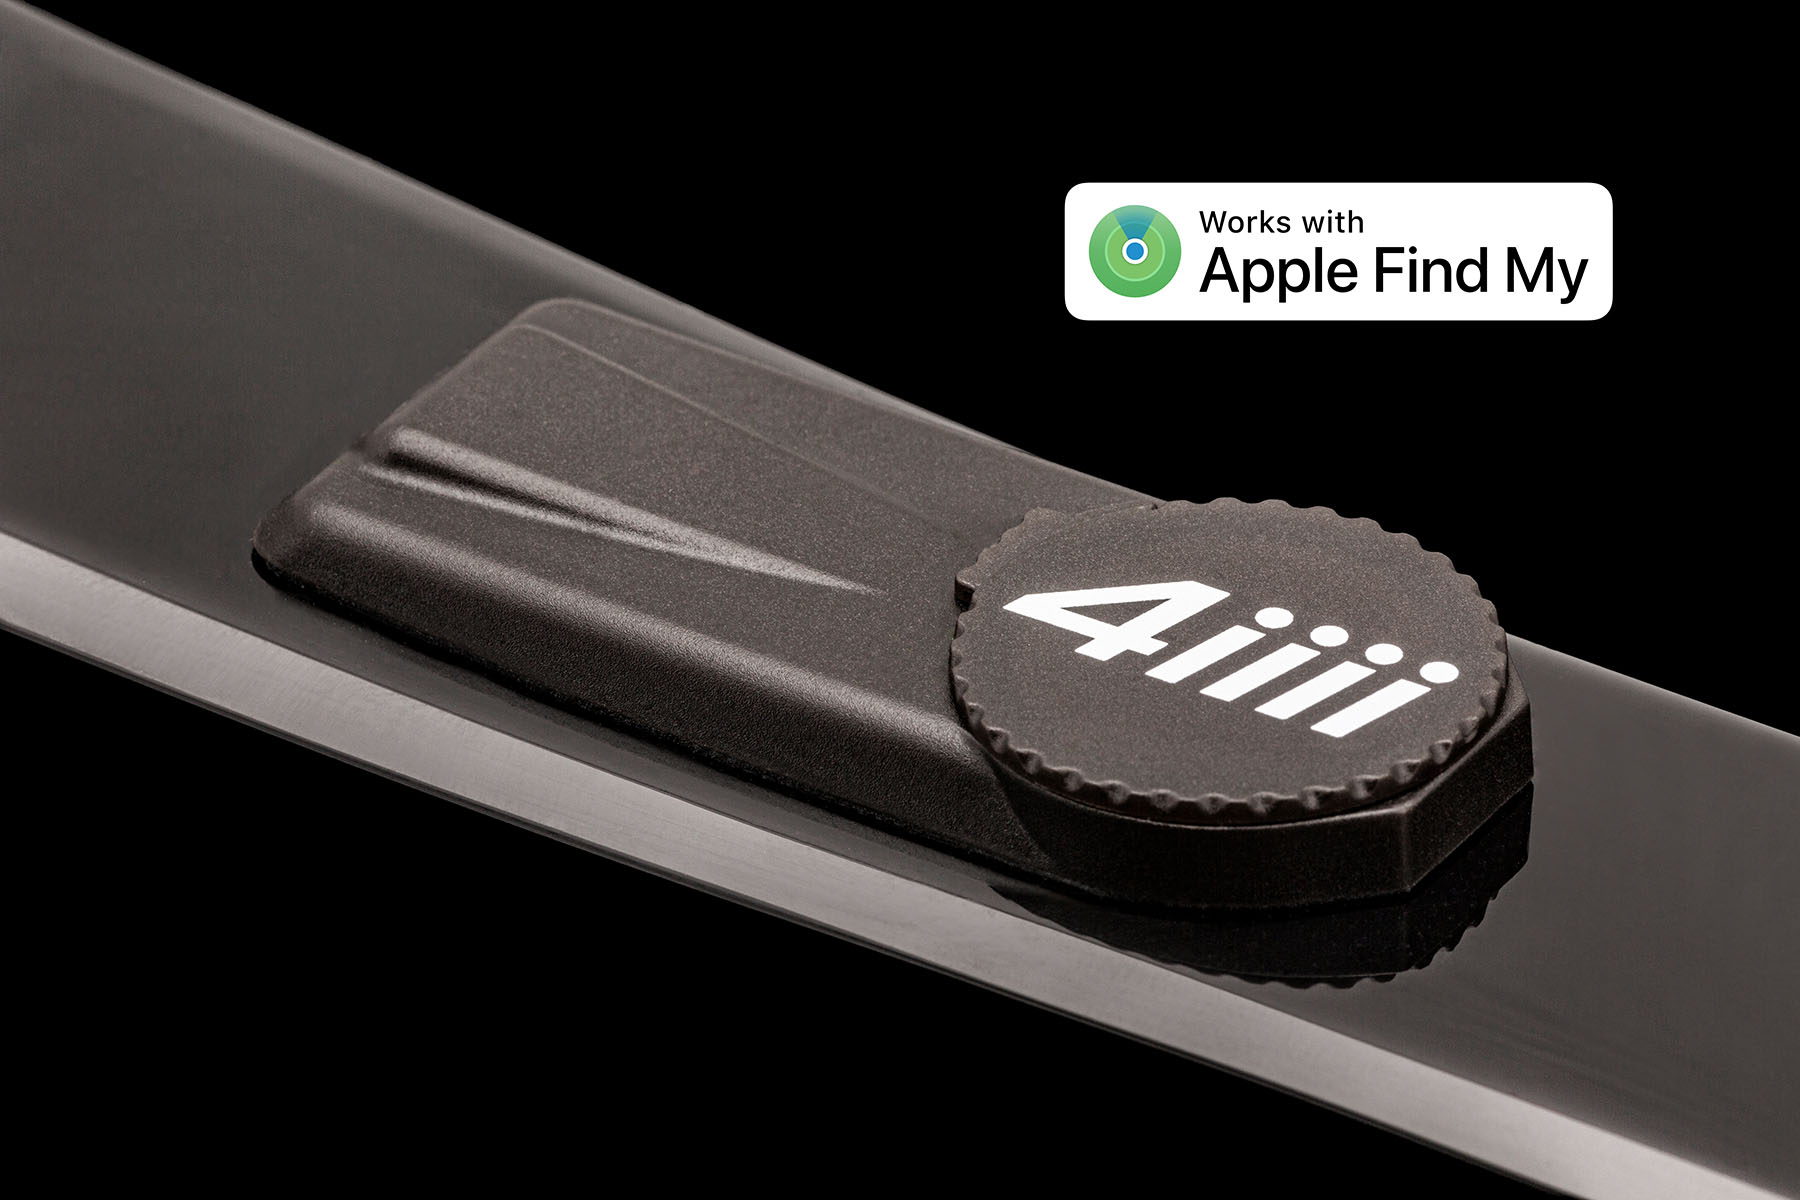 4iiii to offer integration with the Apple Find My network for Power Meters and unveils new Ride App for Apple Watch